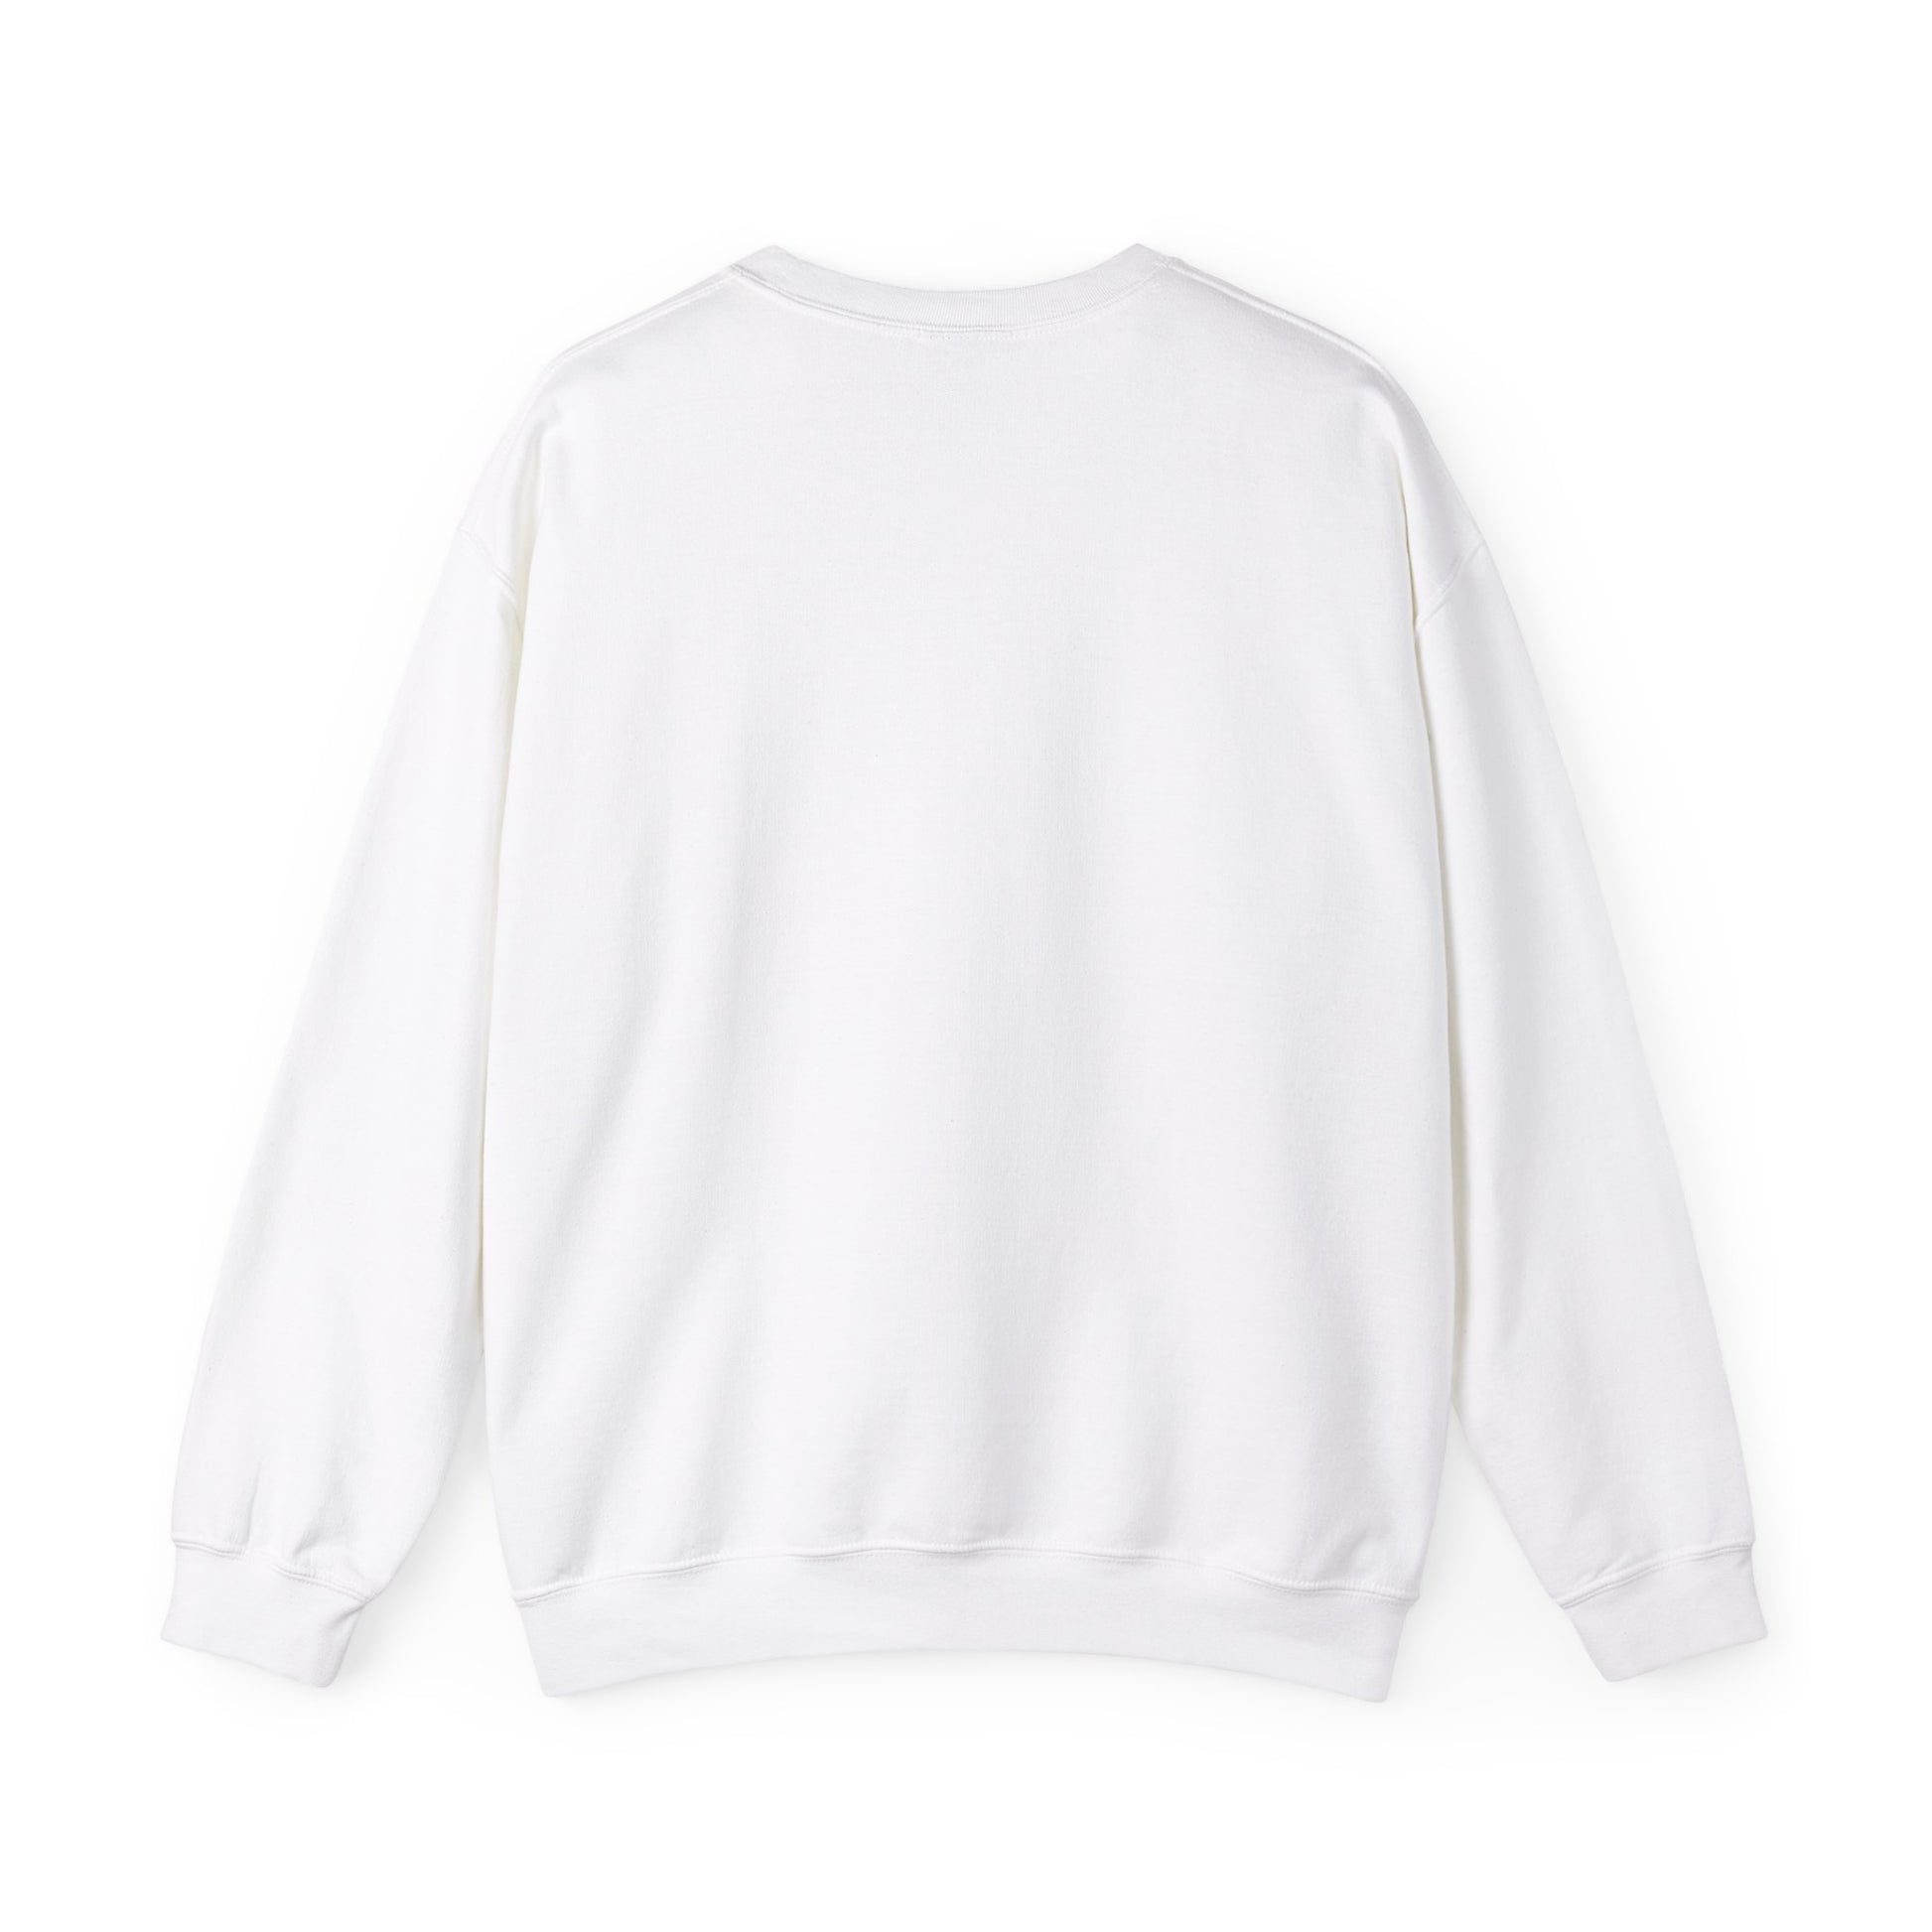 Plain white Unisex Heavy Blend™ Crewneck Signature Logo Sweatshirt by Printify displayed on a white background, featuring a Cabbagetown, Toronto label in the back view. The sweatshirt is long-sleeved.